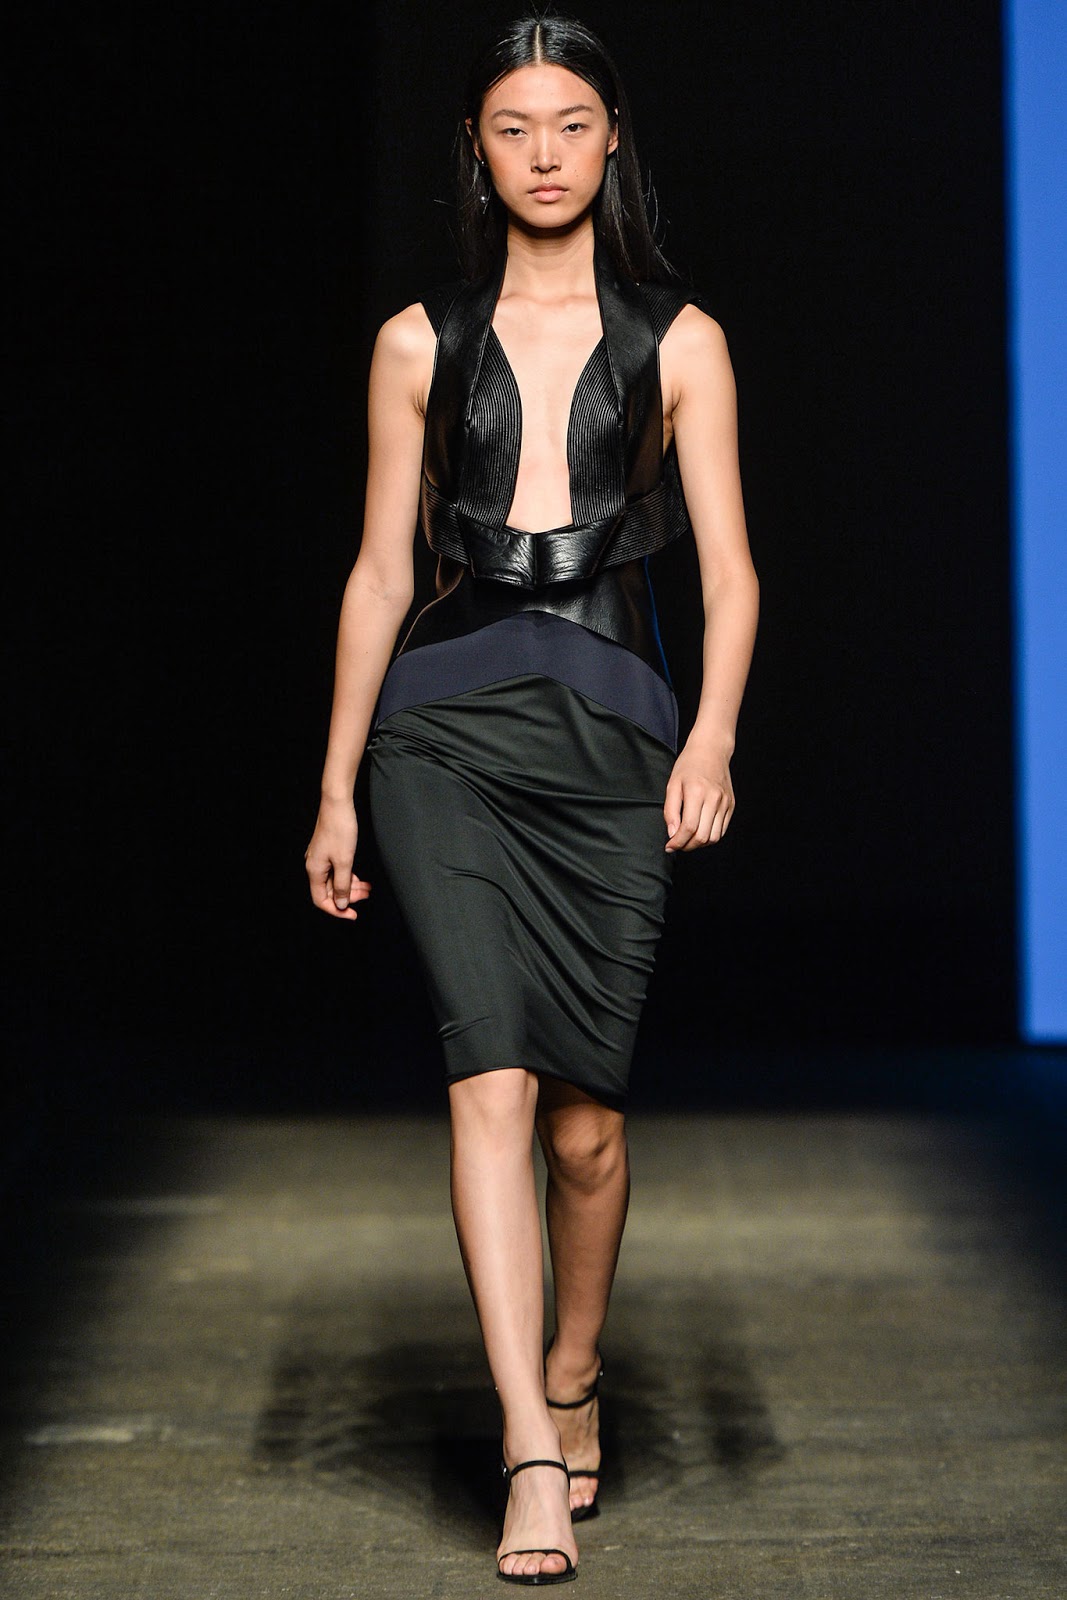 dion lee s/s 14 new york | visual optimism; fashion editorials, shows ...